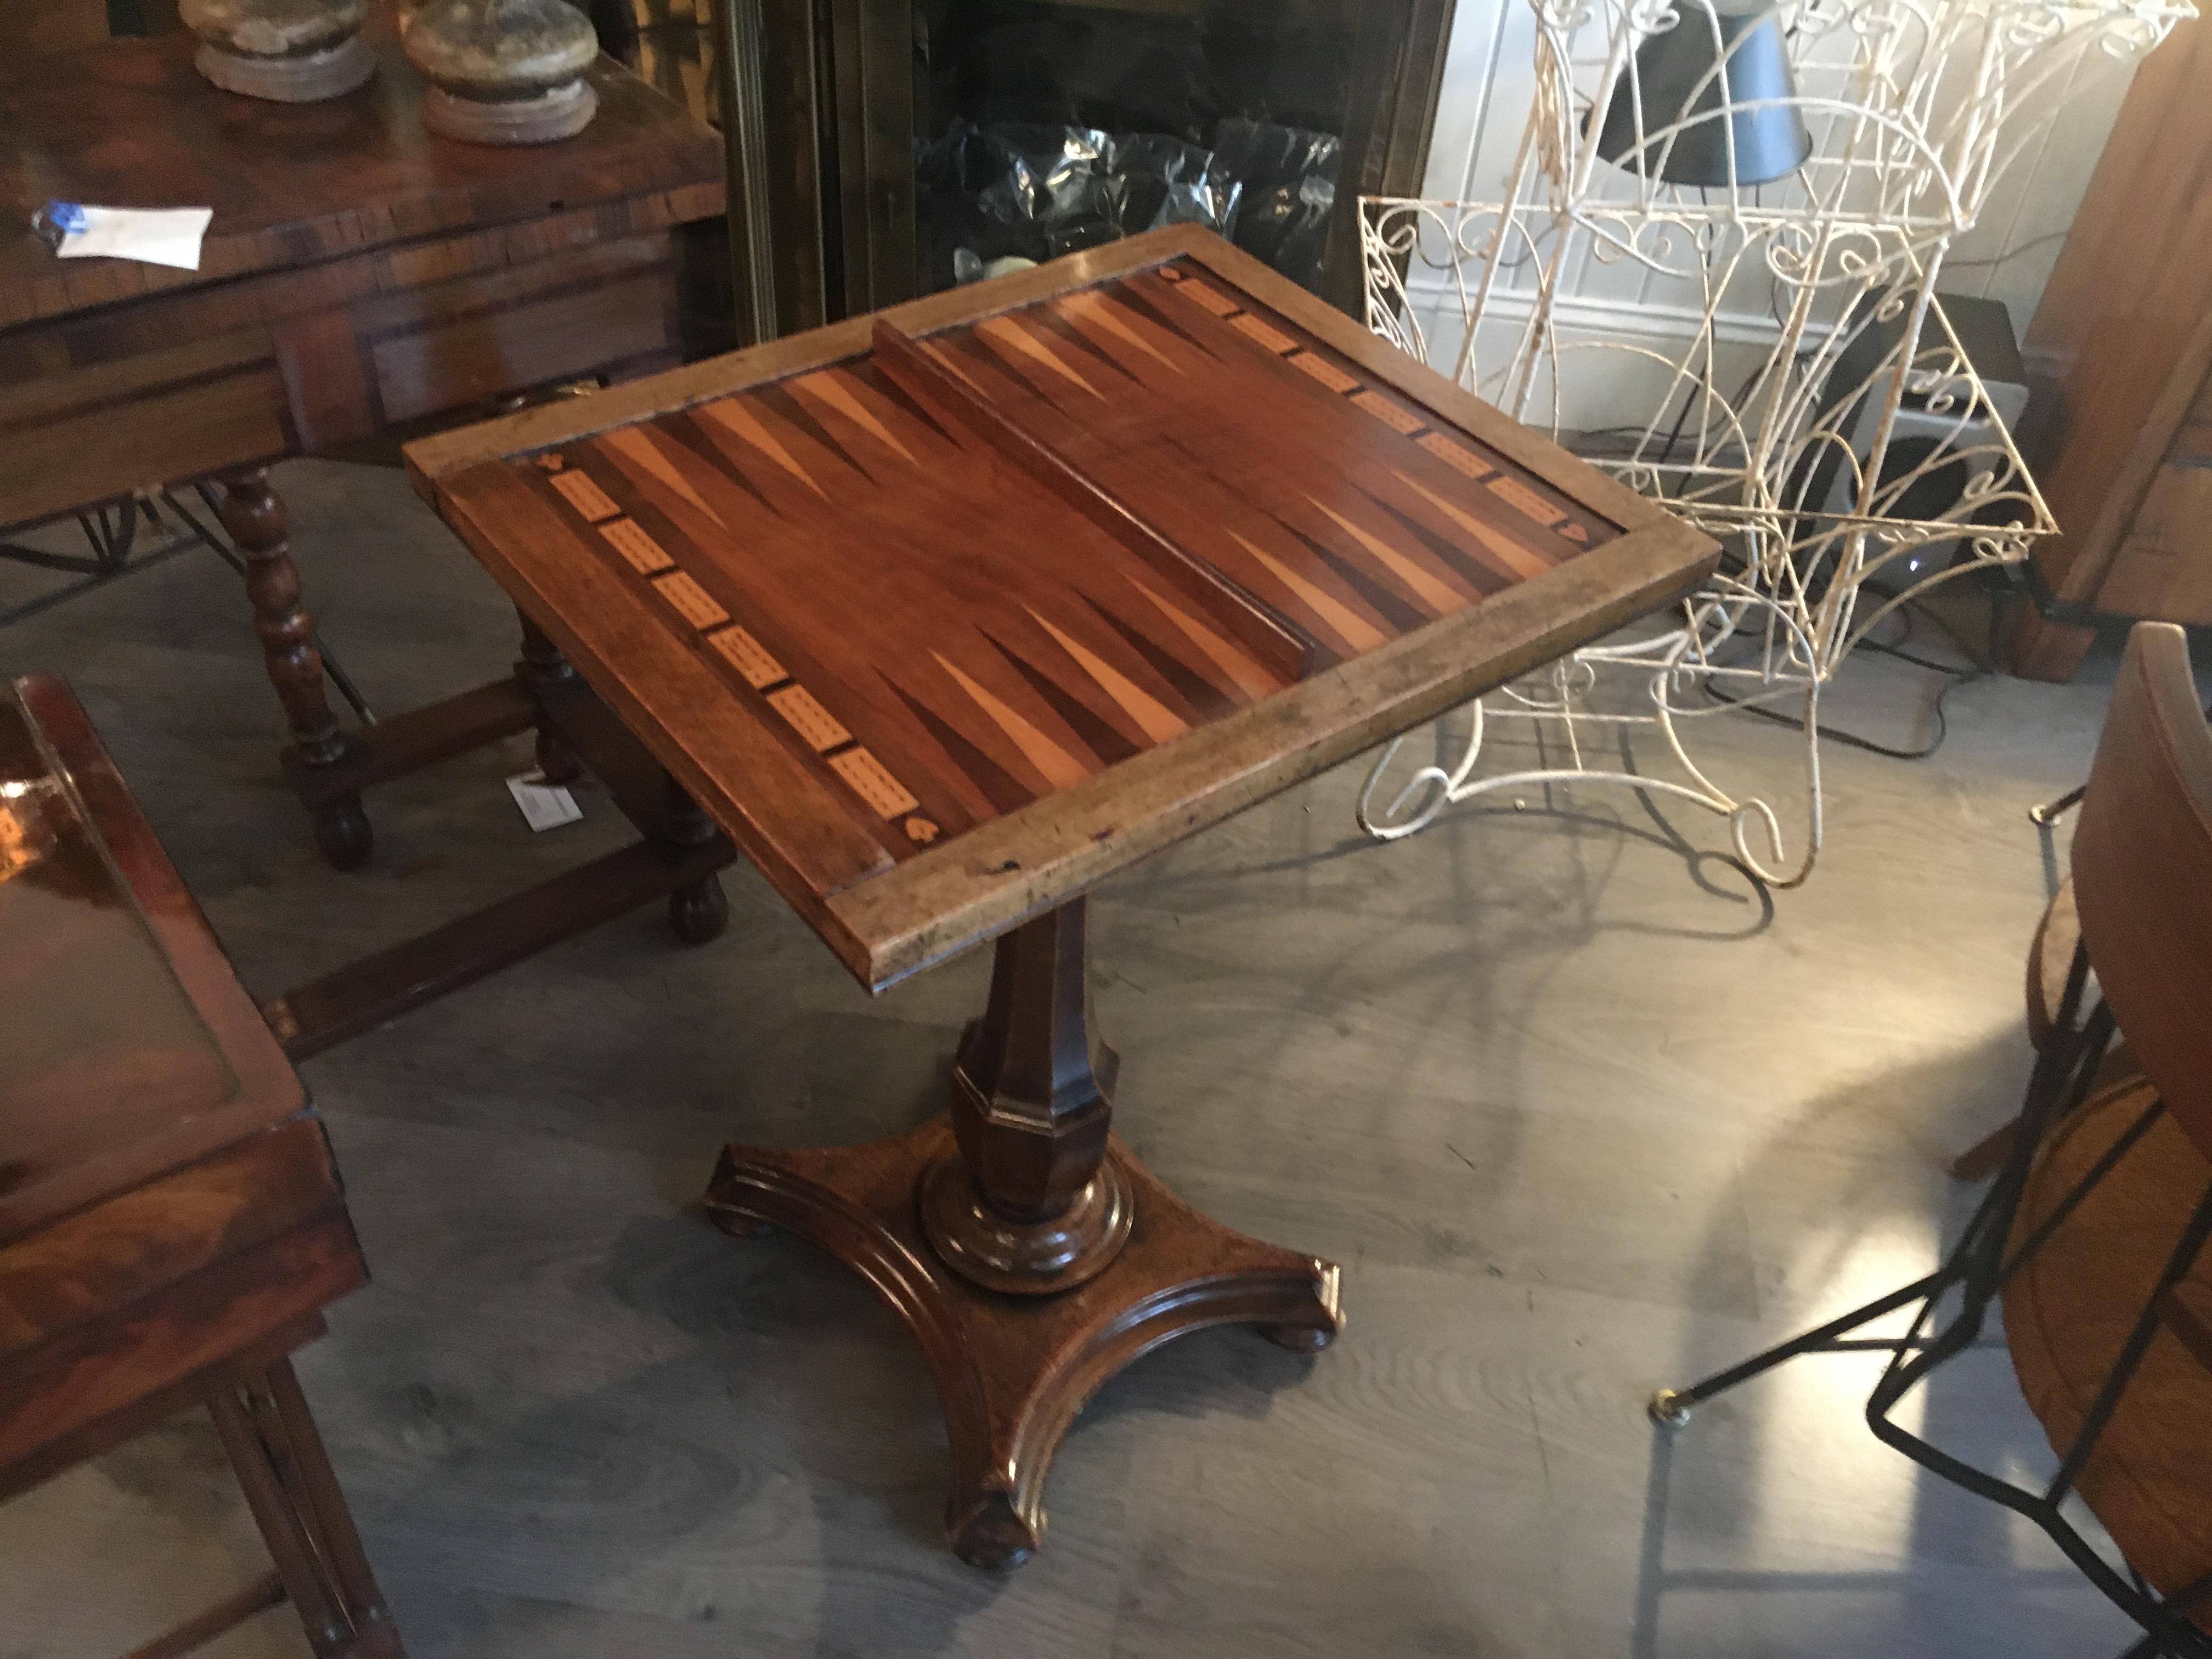 19th English Walnut Games Table, Top Flips For Both Chess And Cribbage/bsckgammo 1